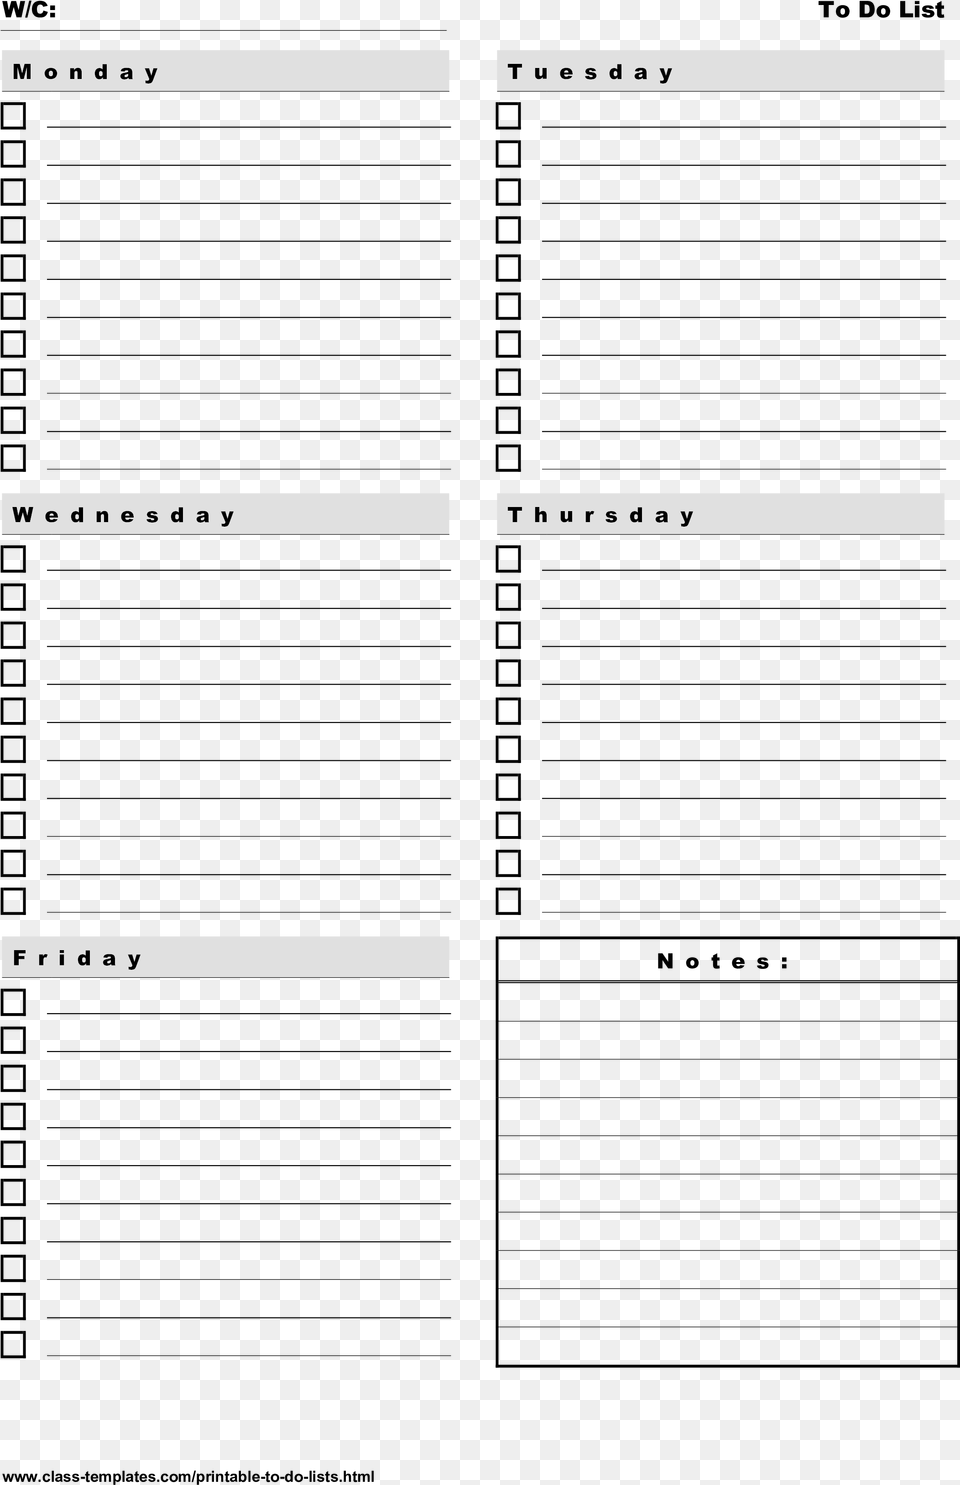 Printable To Do List 5 Days Weekly Plan Main Image Do This Week Template, Page, Text Png